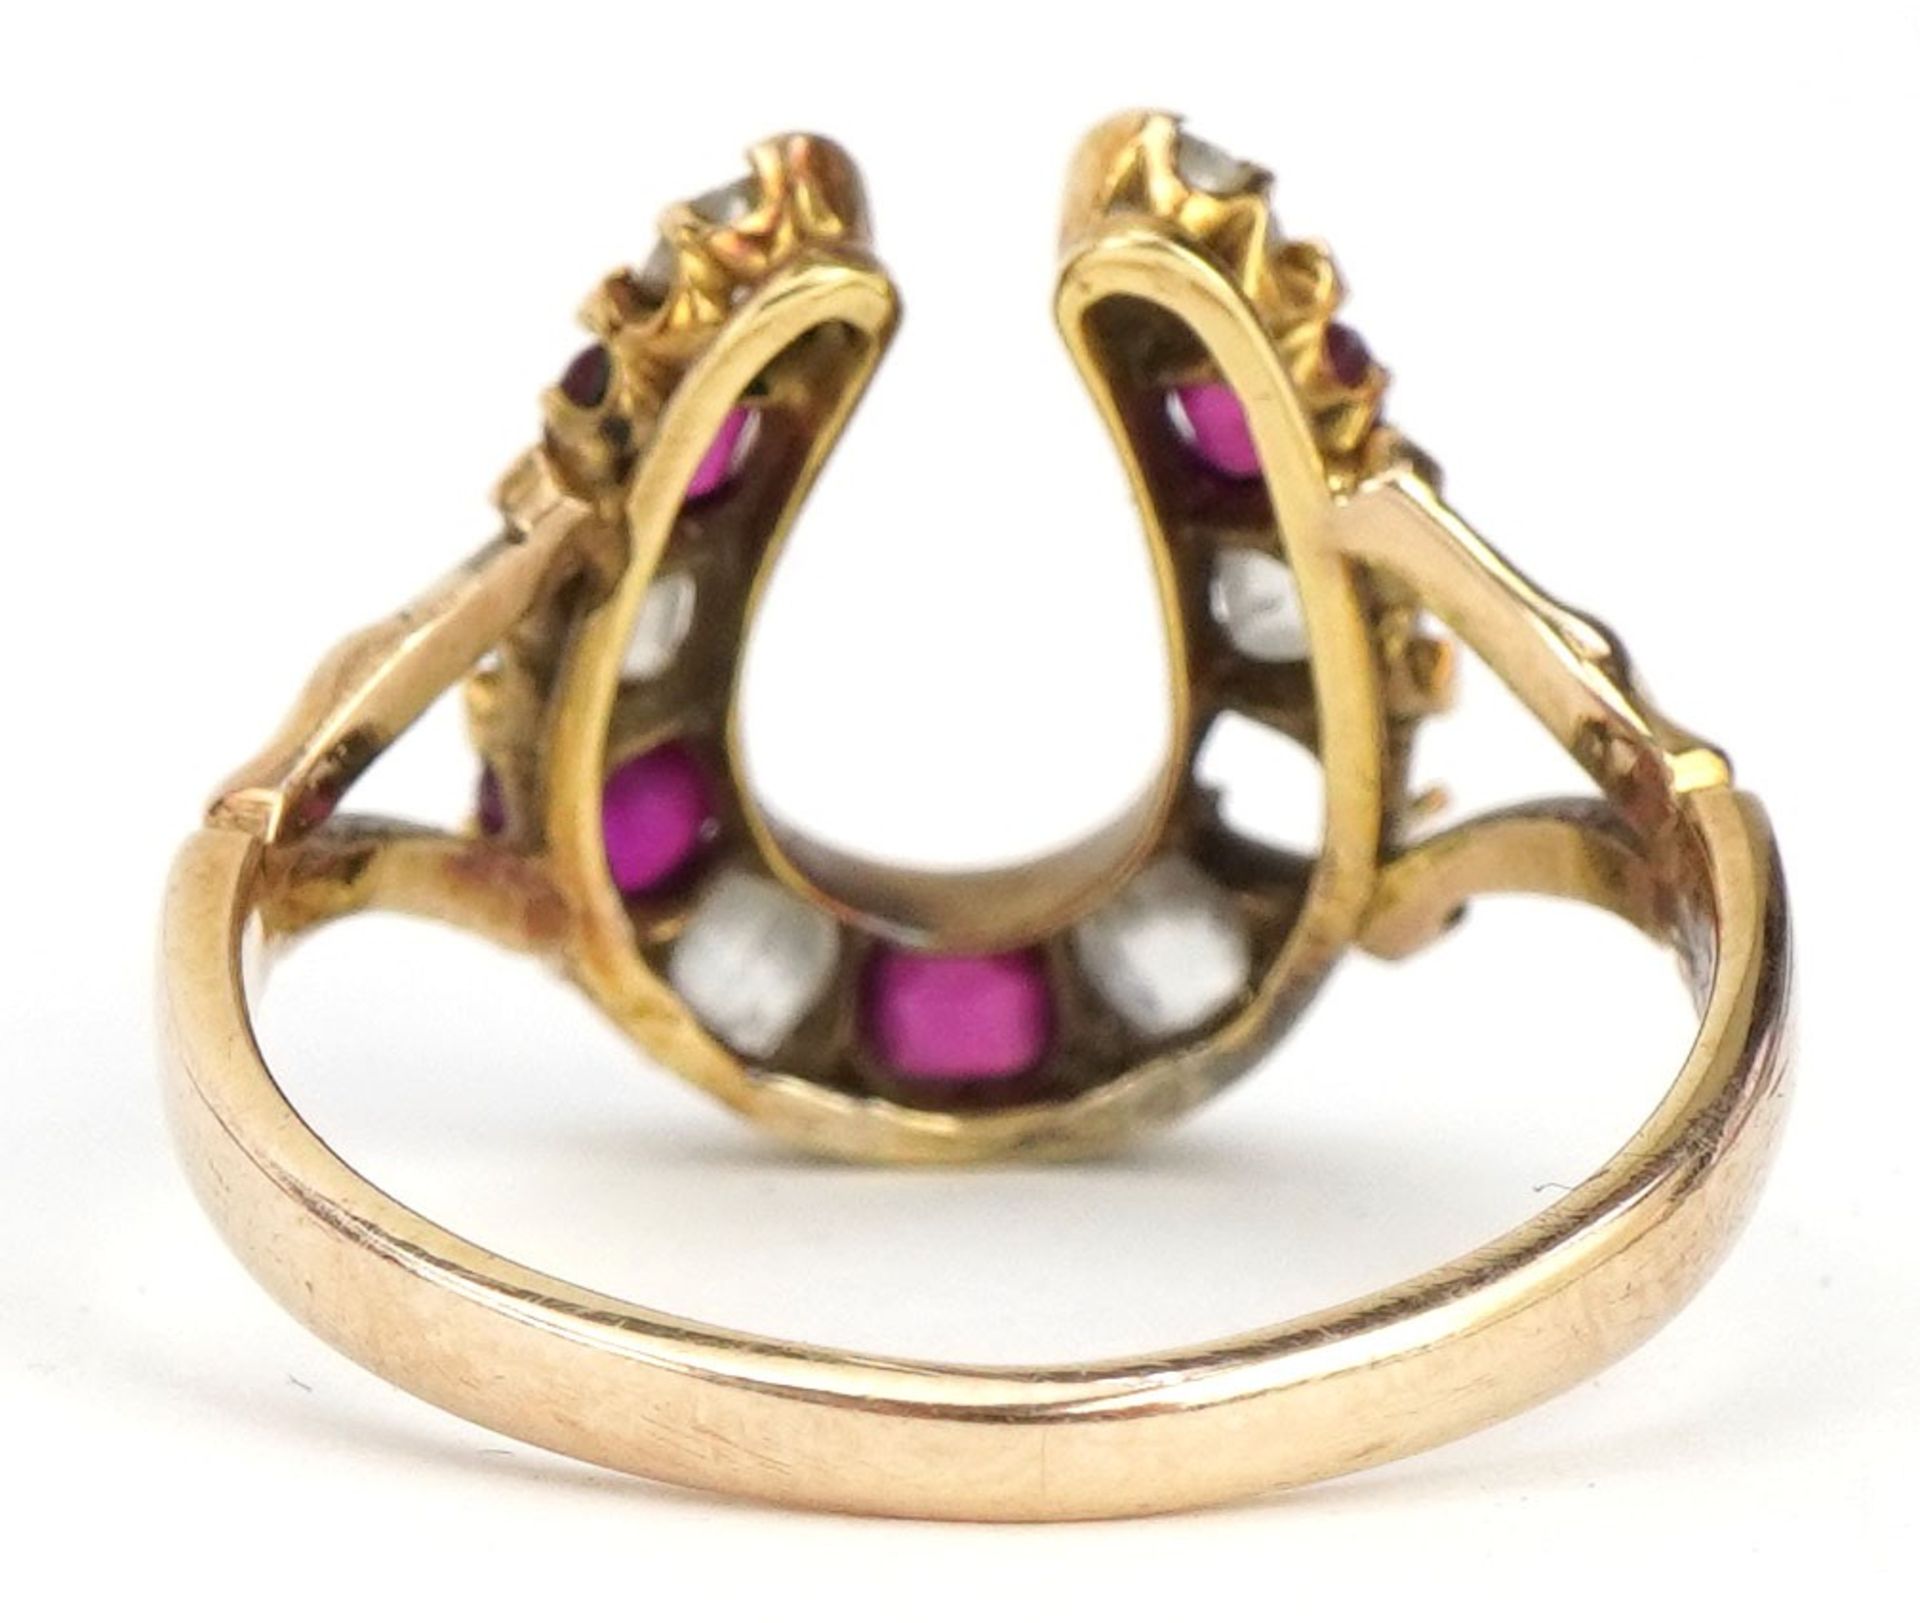 19th century unmarked gold diamond and ruby horseshoe ring, tests as 18ct gold, the largest - Image 2 of 3